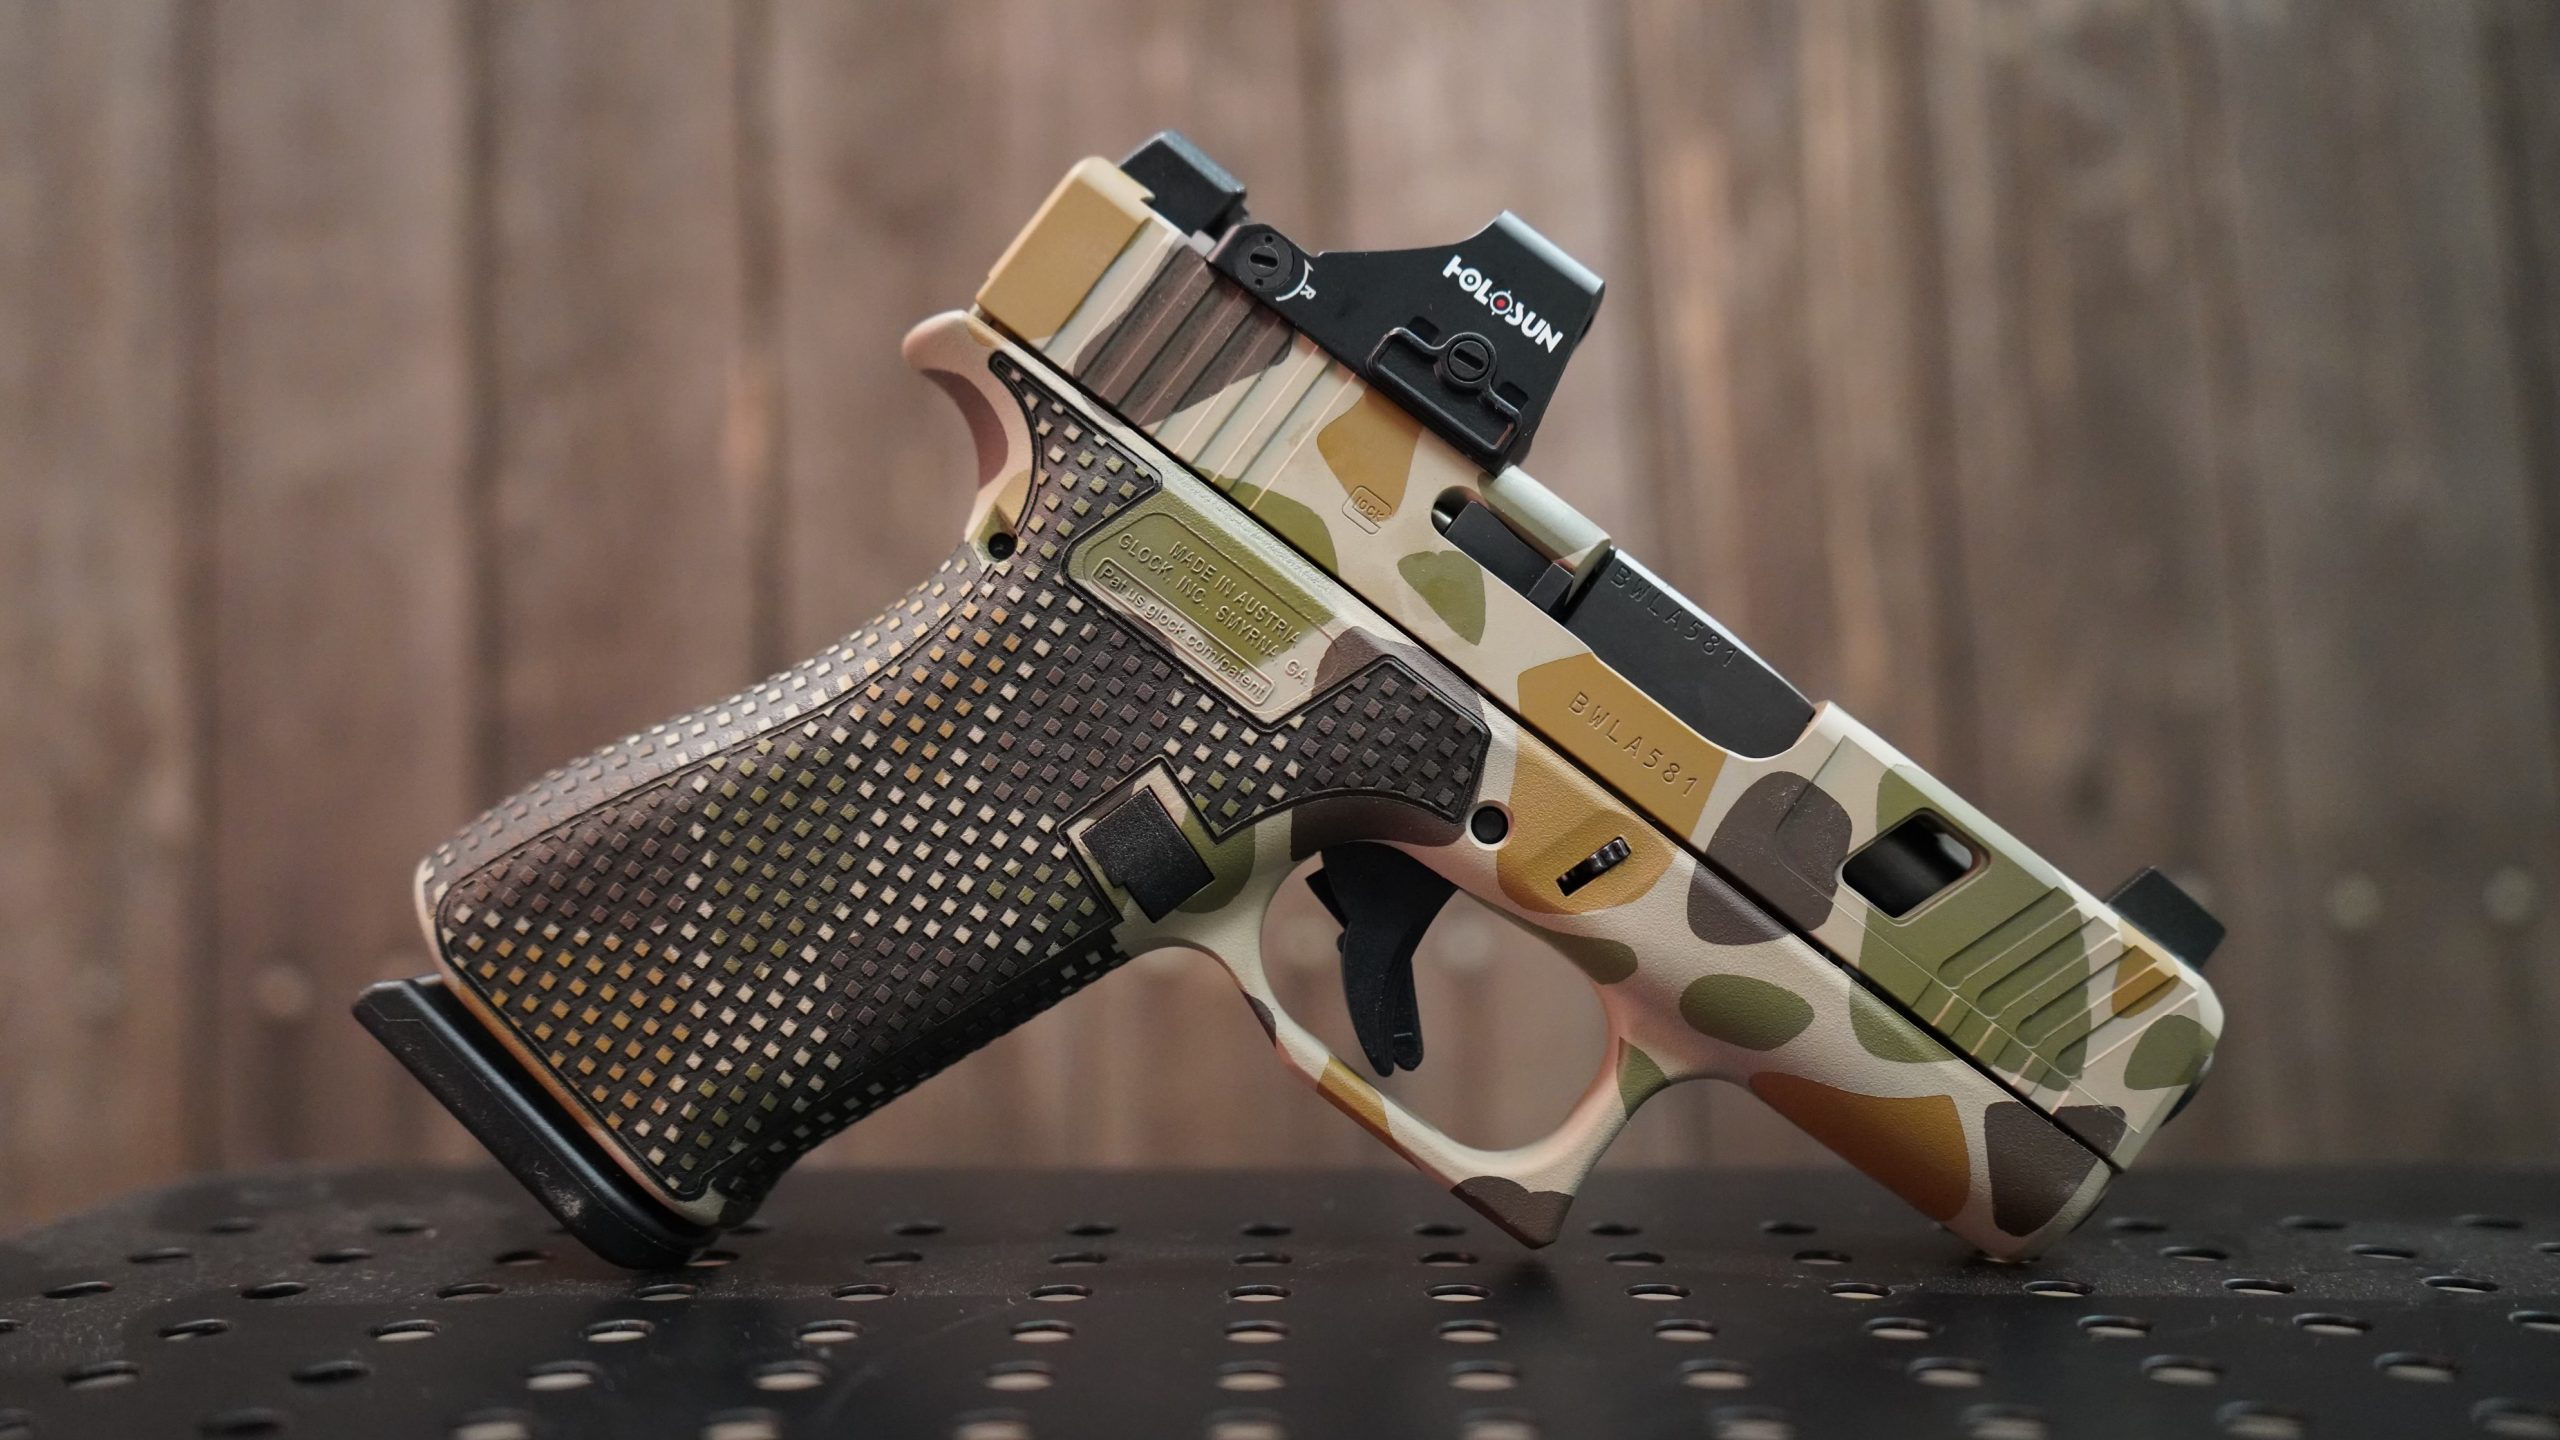 Review: Modifying and Stippling a Glock -The Firearm Blog